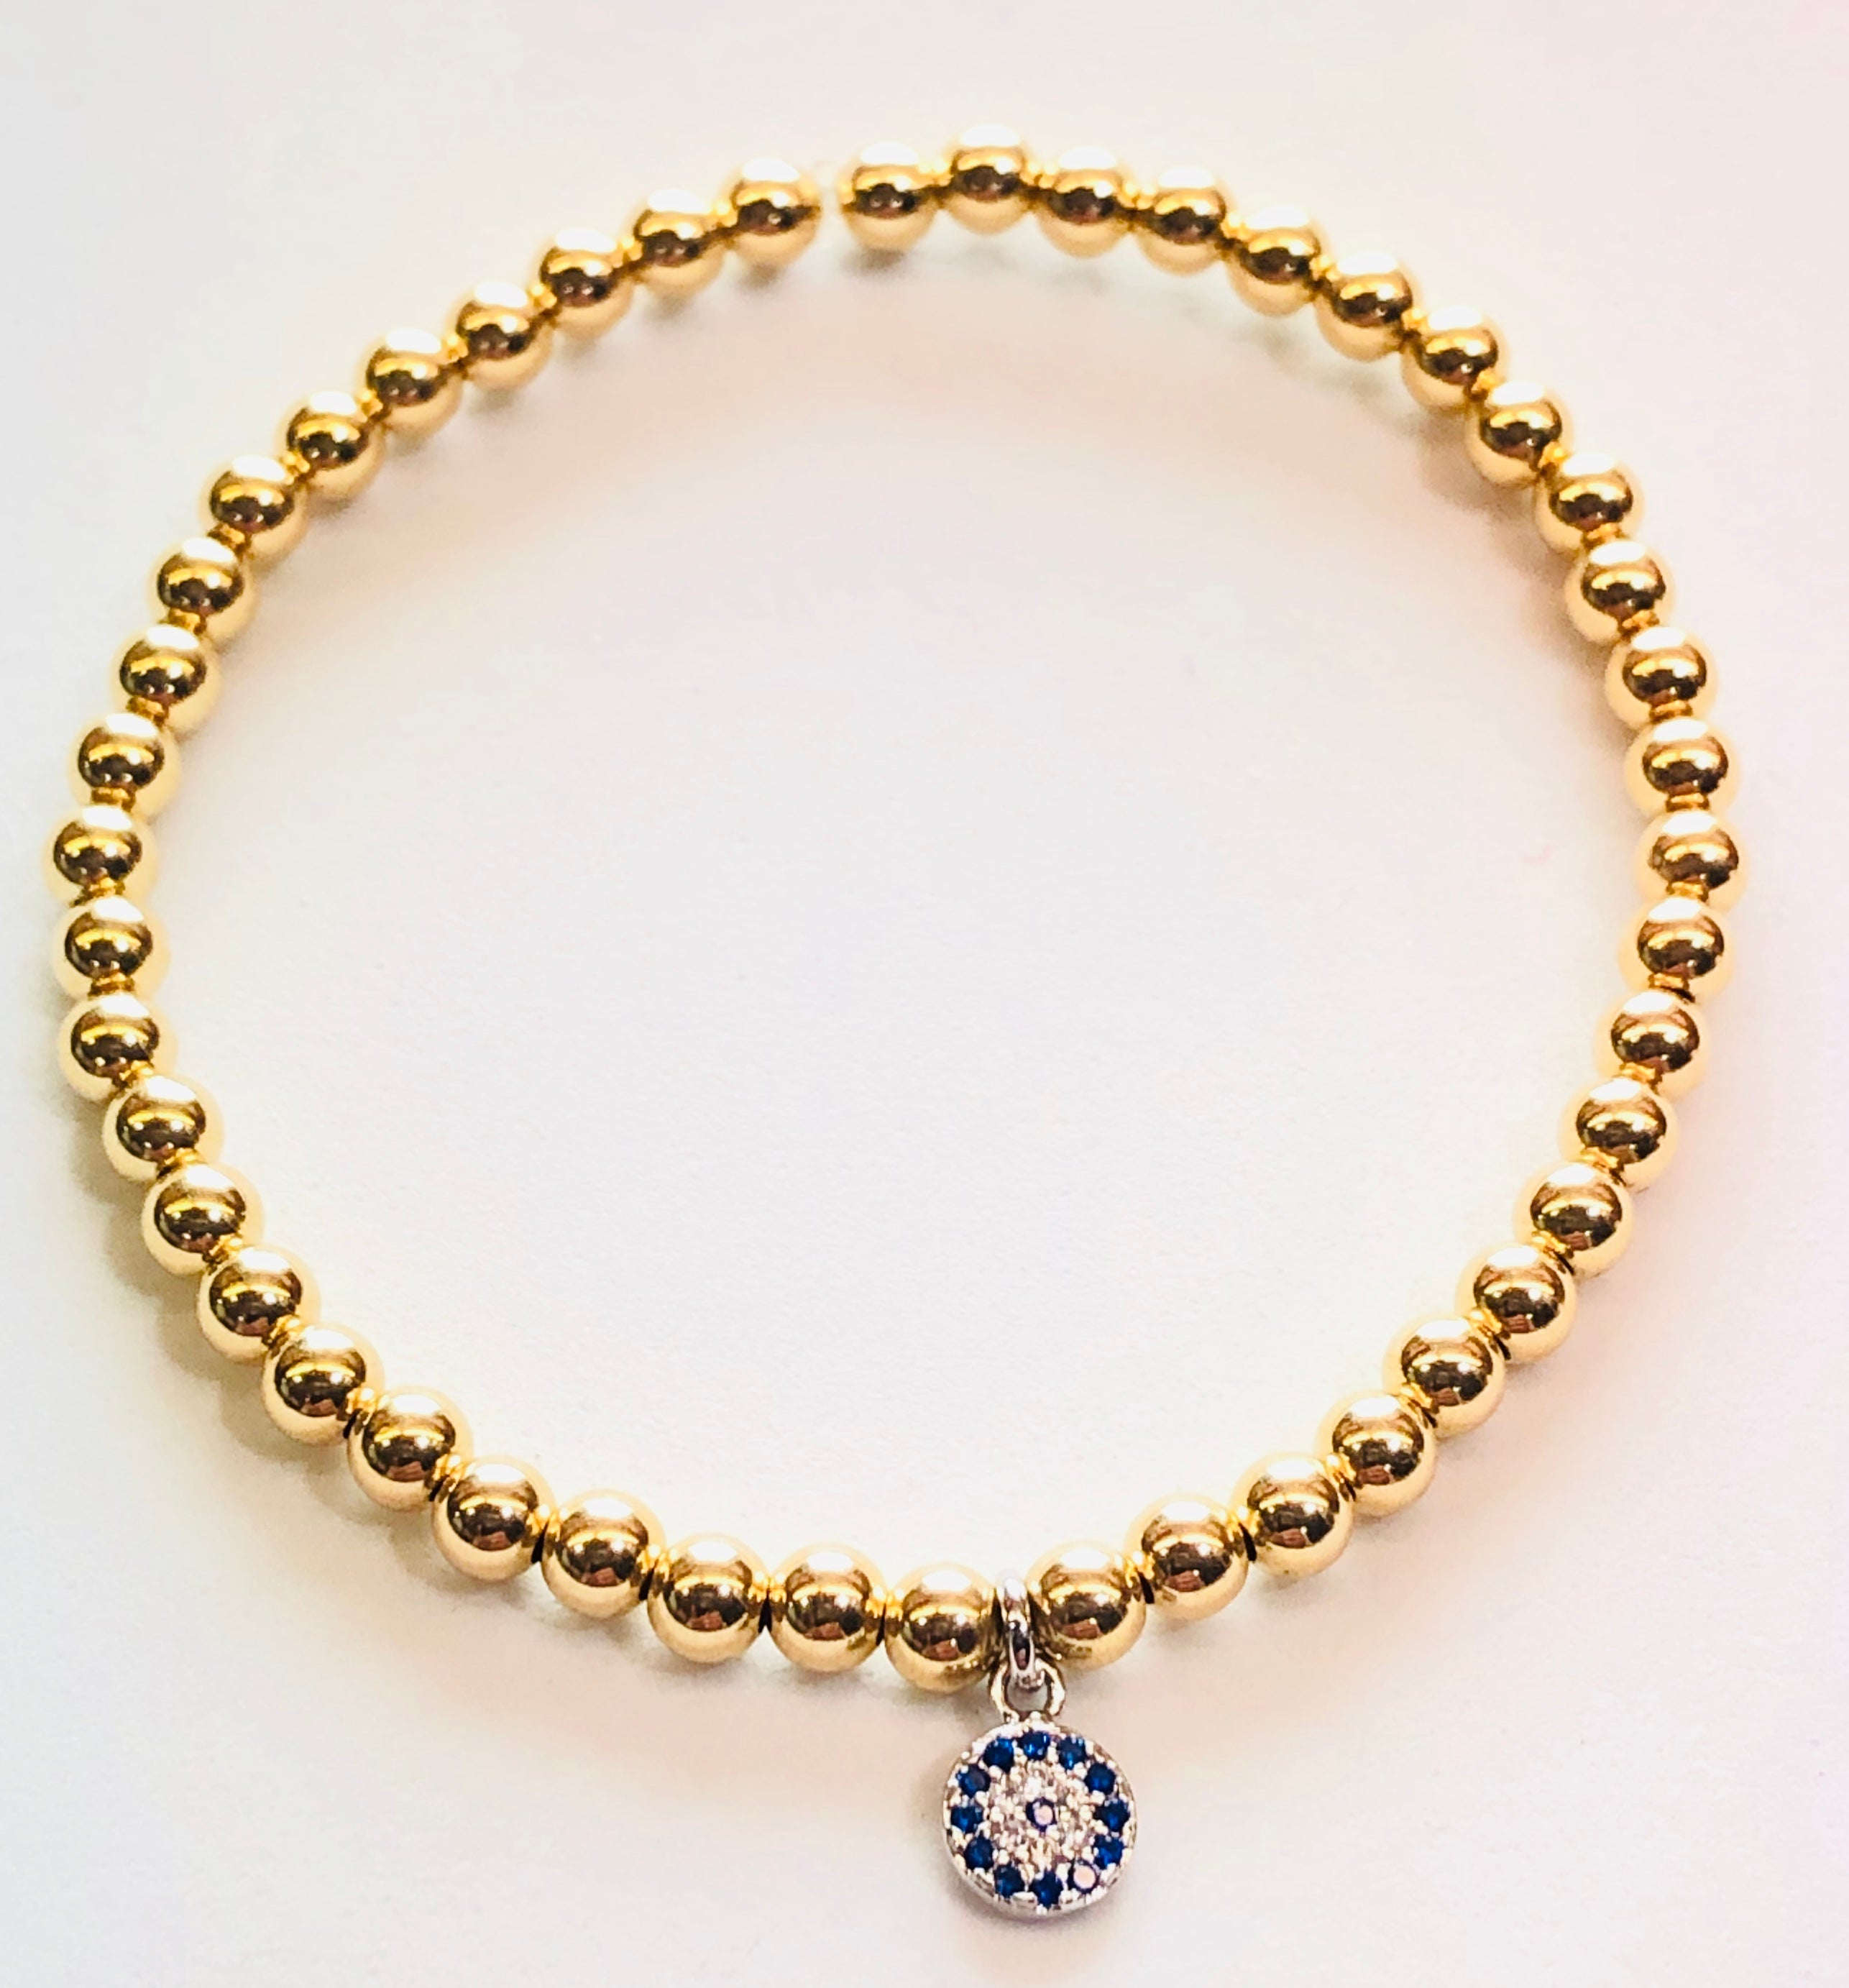 4mm 14kt Gold Filled Bead Bracelet with Small Round Sapphire